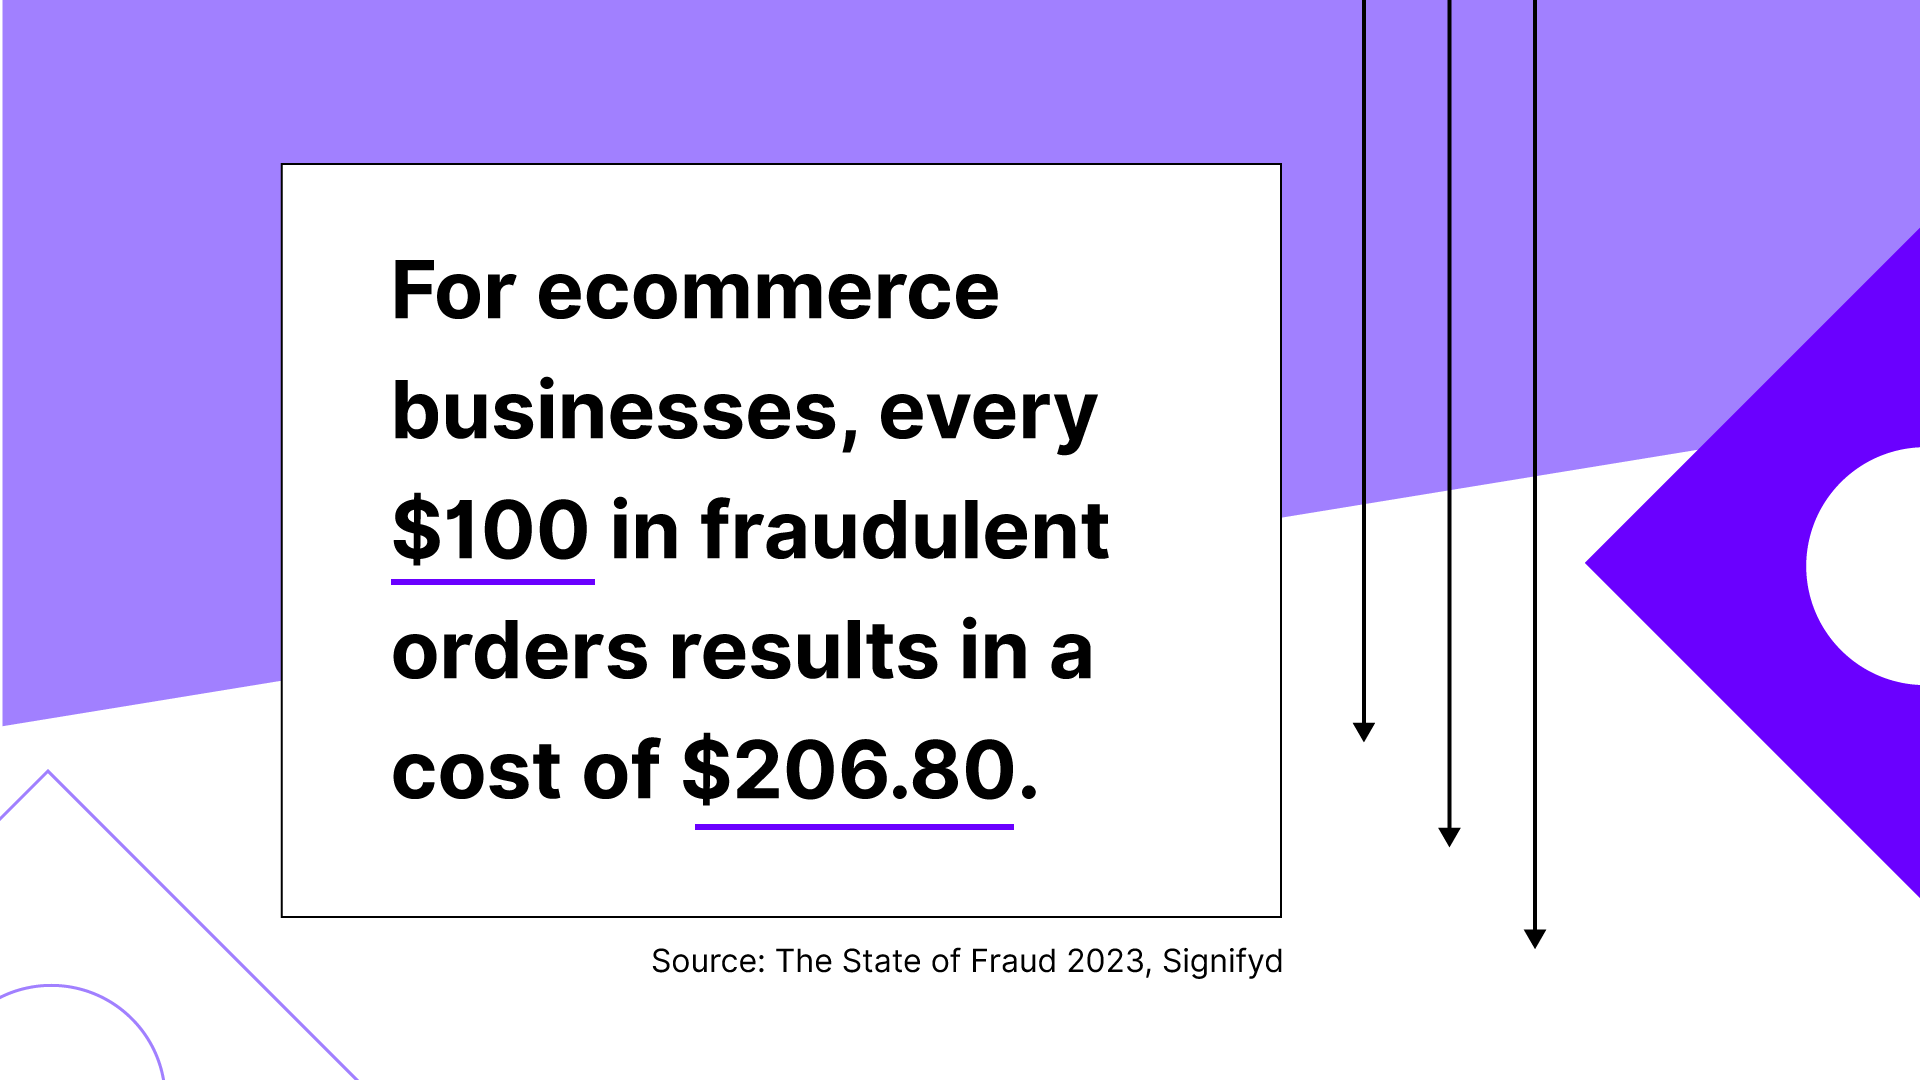 A Signifyd study shows that ecommerce stores lose an average of $206.80 for every $100 in fraudulent orders.